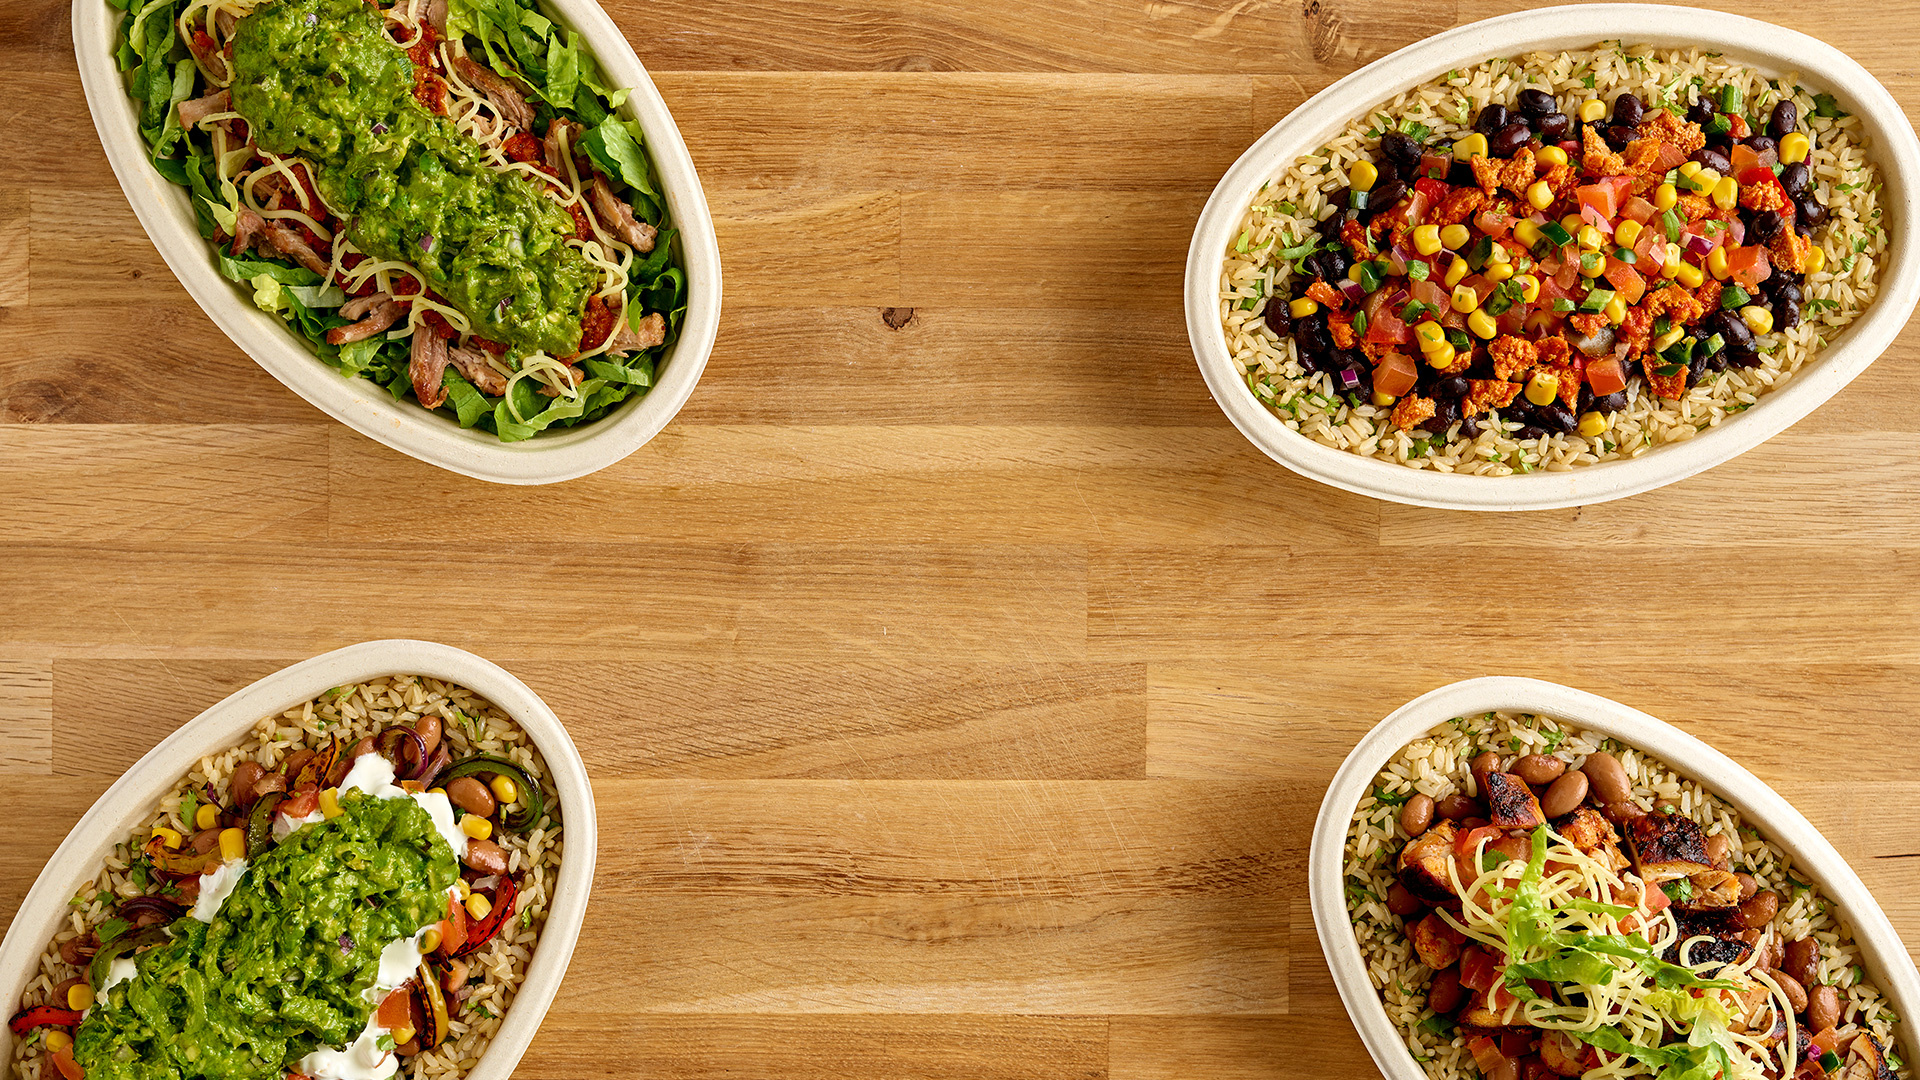 Chipotle launches lifestyle bowls | Foodism